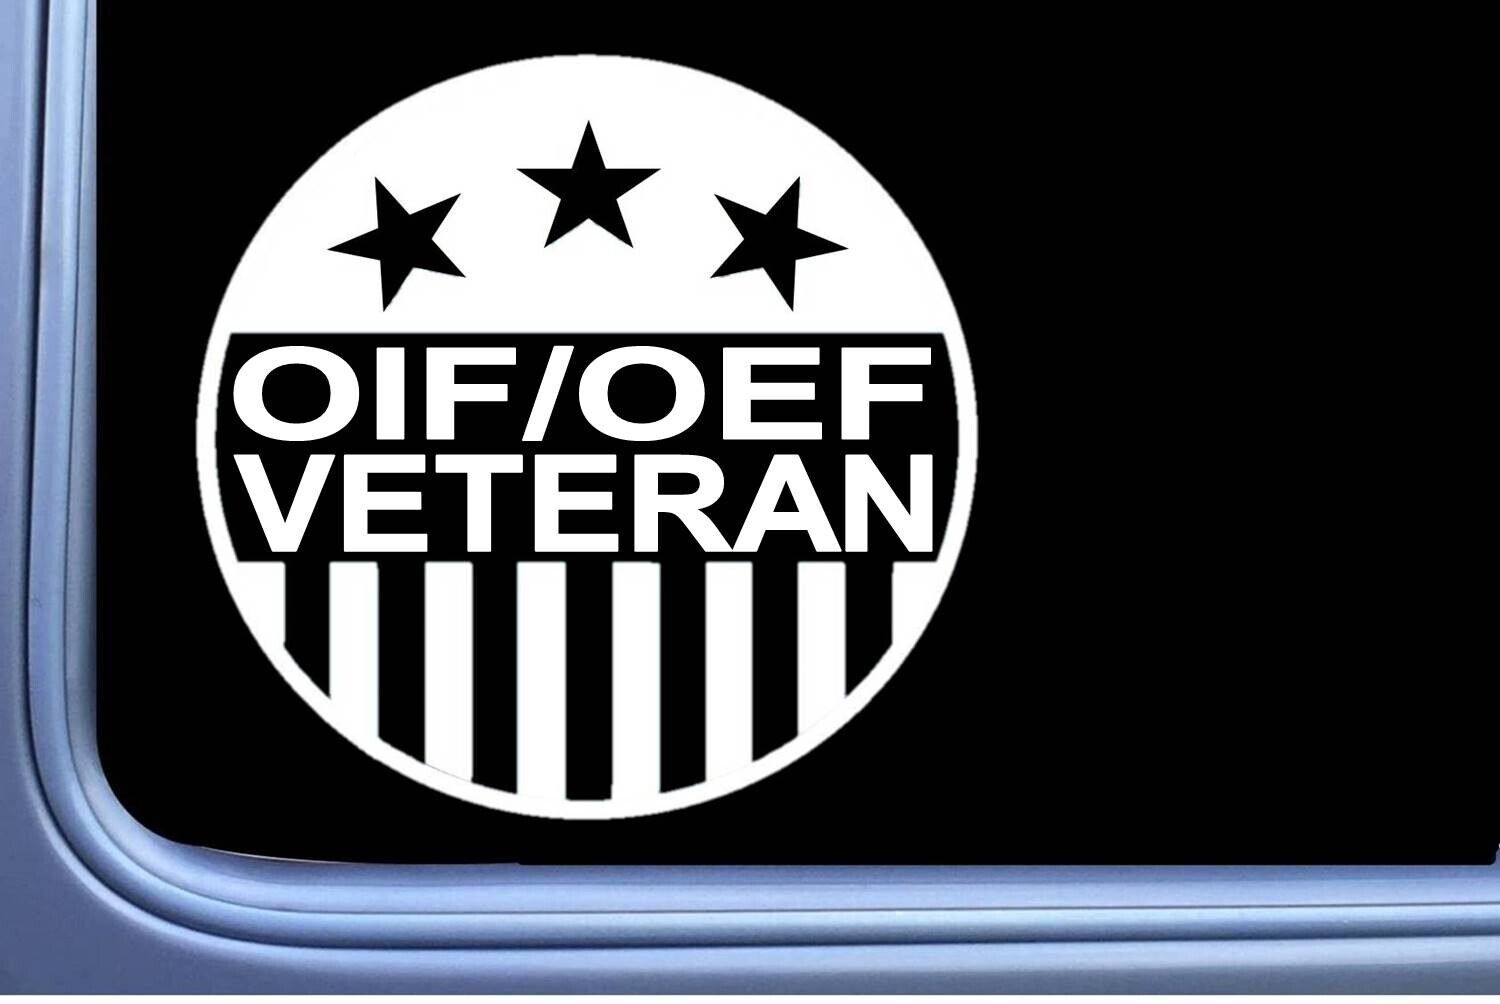 OIF OEF Operation Enduring Freedom Veteran decal sticker OS 420 6 inch